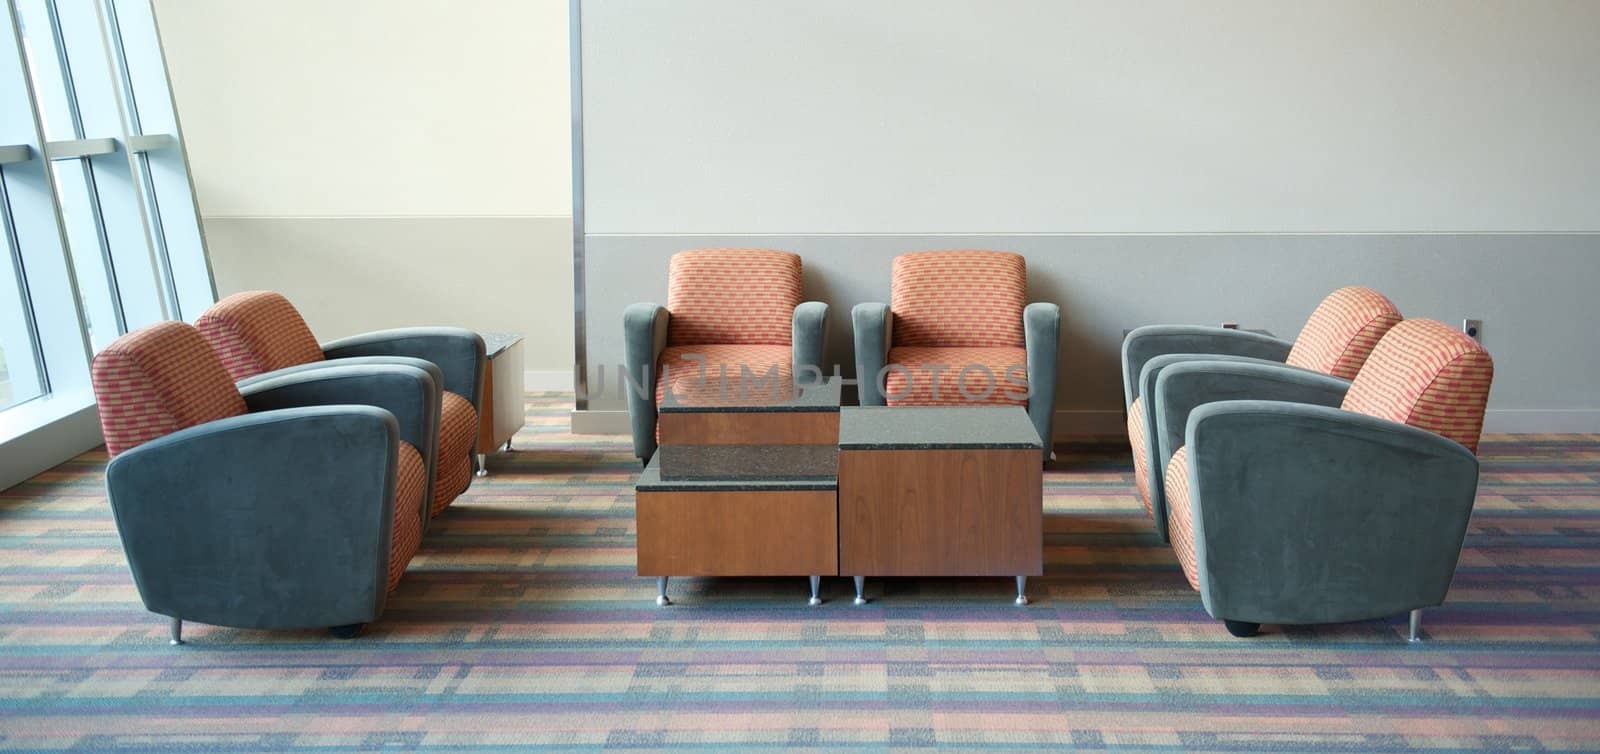 Airport Lounge Seating by pixelsnap